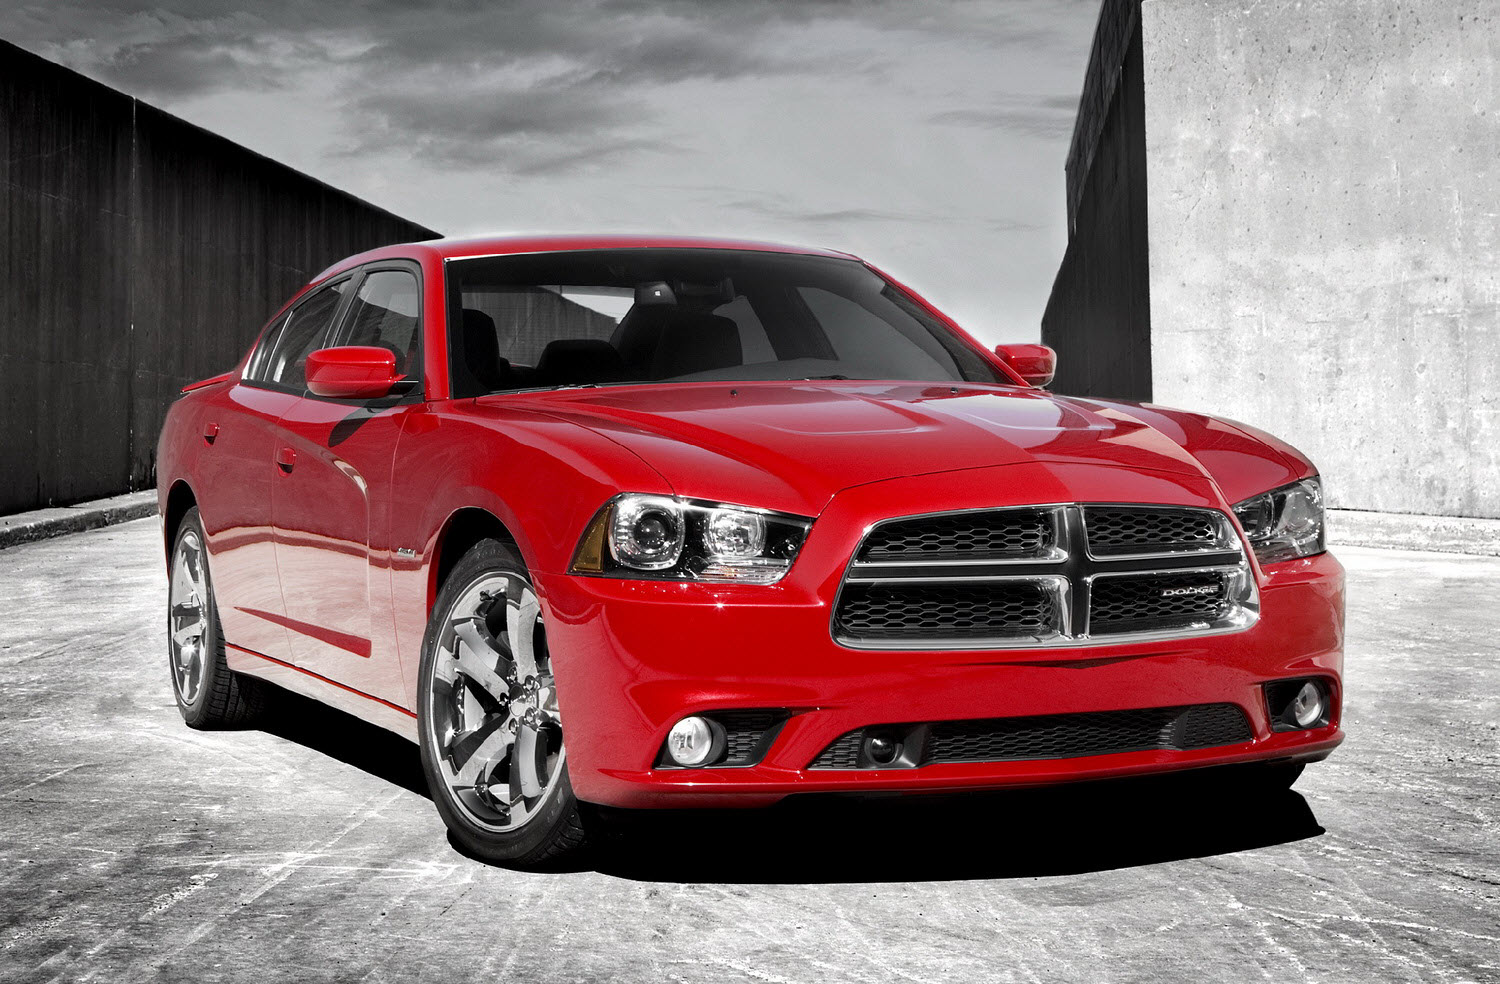 New 2011 Dodge Charger Unveiled